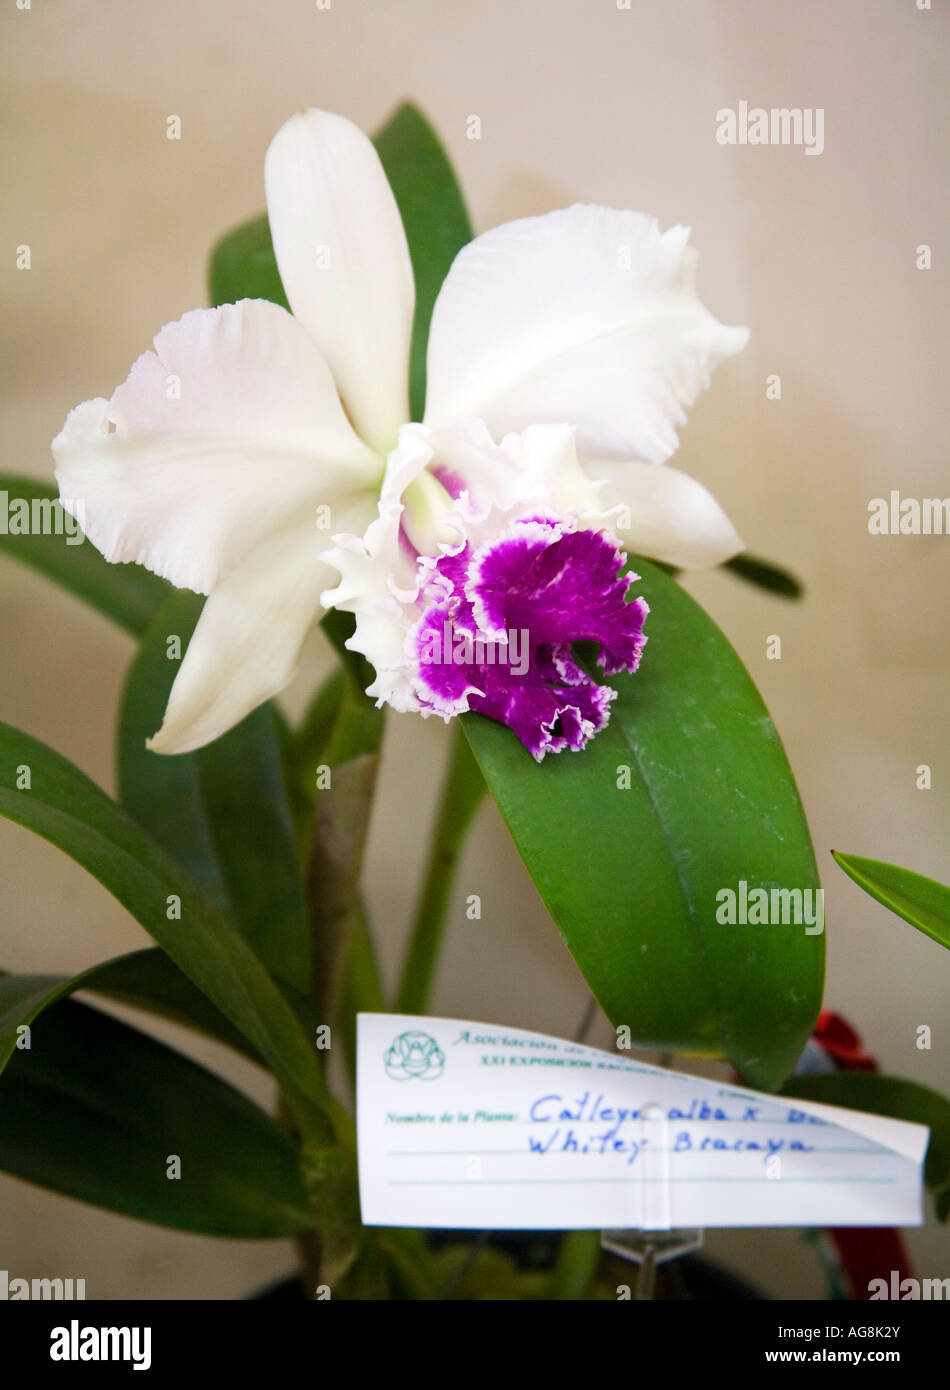 Cattleya alba orchid seen at an exhibition in Panama City Stock Photo